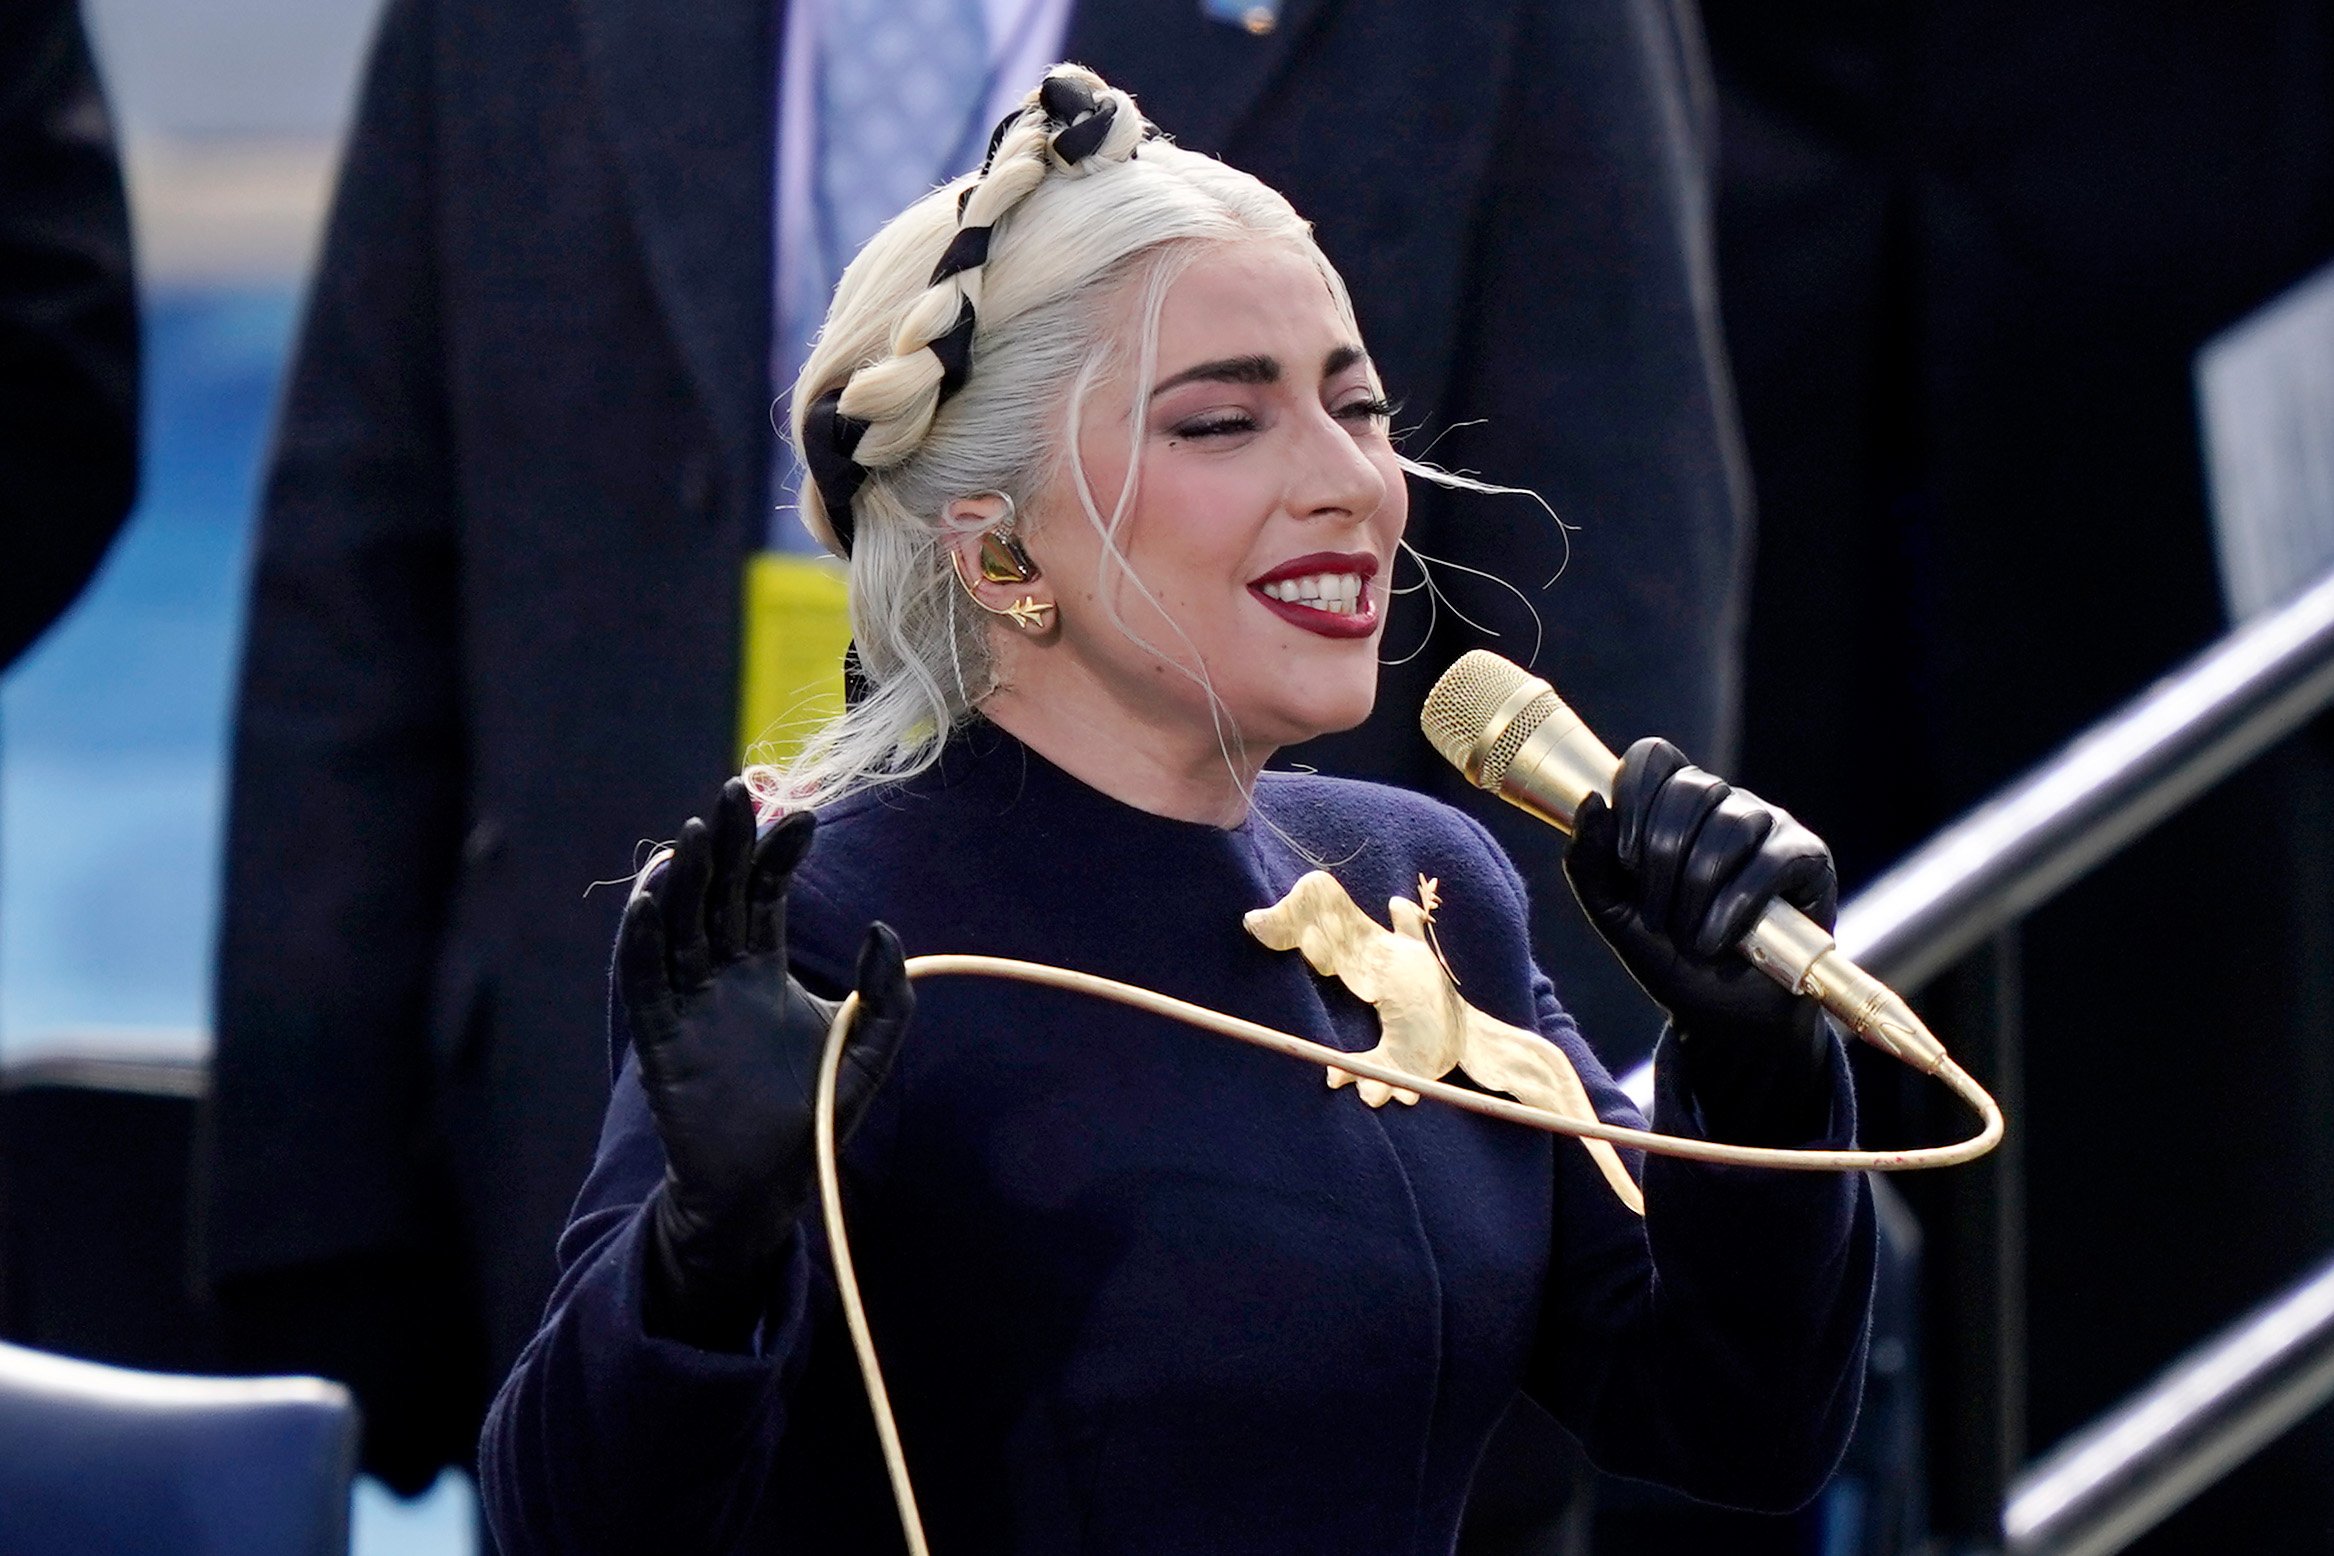 Lady Gaga sings the National Anthem at the inauguration of U.S. President-elect Joe Biden on the West Front of the U.S. Capitol on January 20, 2021 in Washington, DC. During today's inauguration ceremony Joe Biden becomes the 46th president of the United States. (Photo by Drew Angerer/Getty Images)